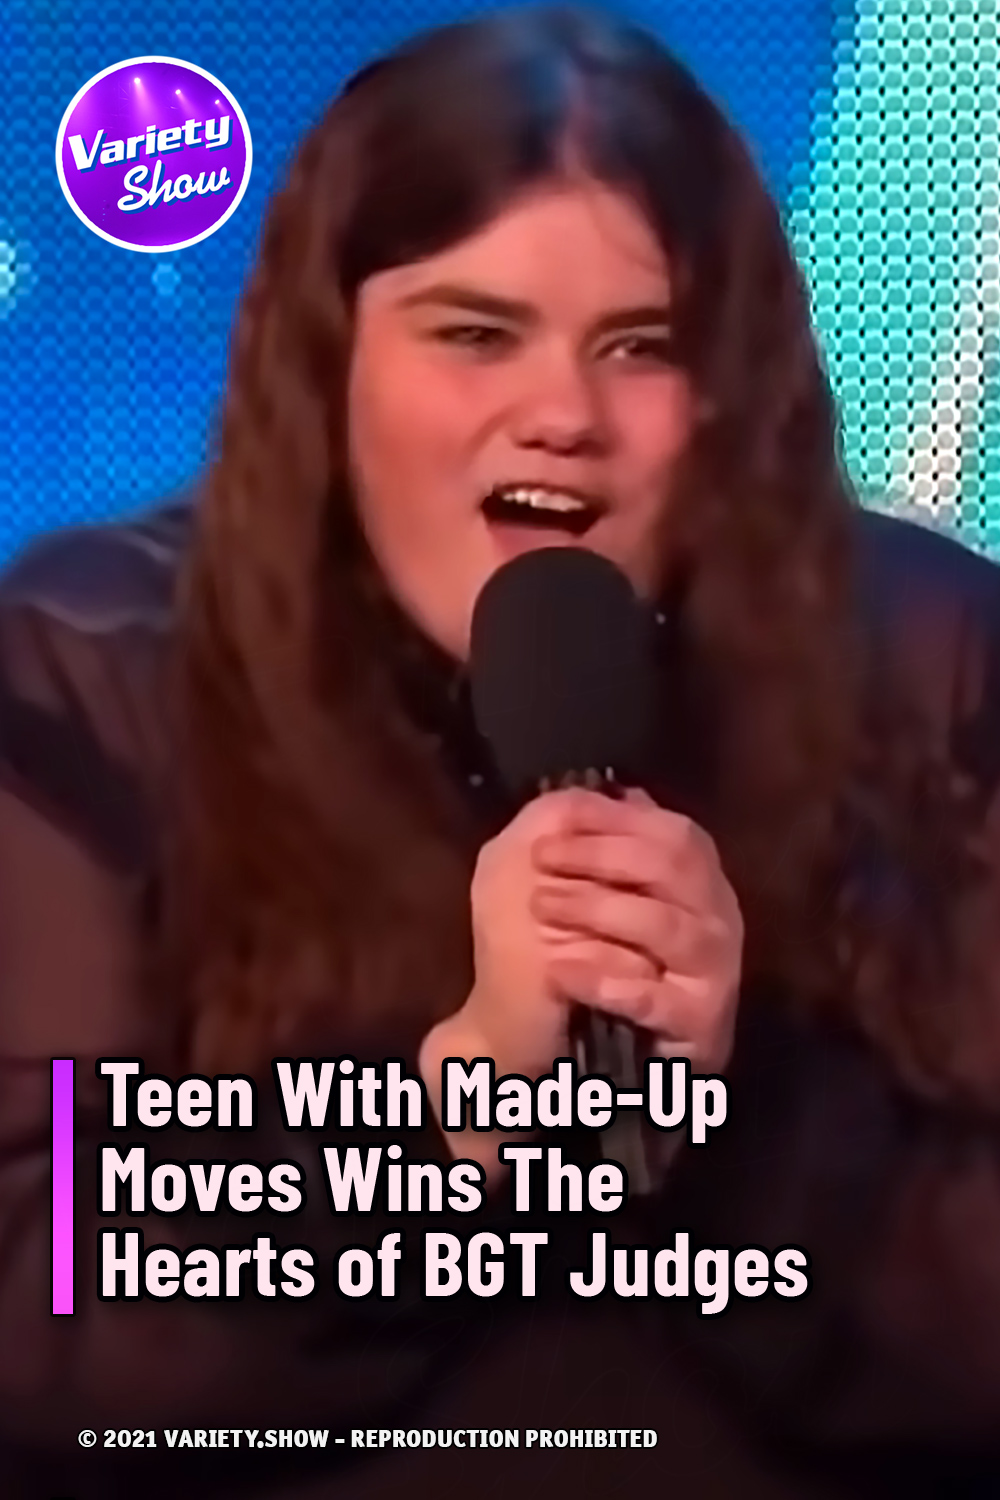 Teen With Made-Up Moves Wins The Hearts of BGT Judges